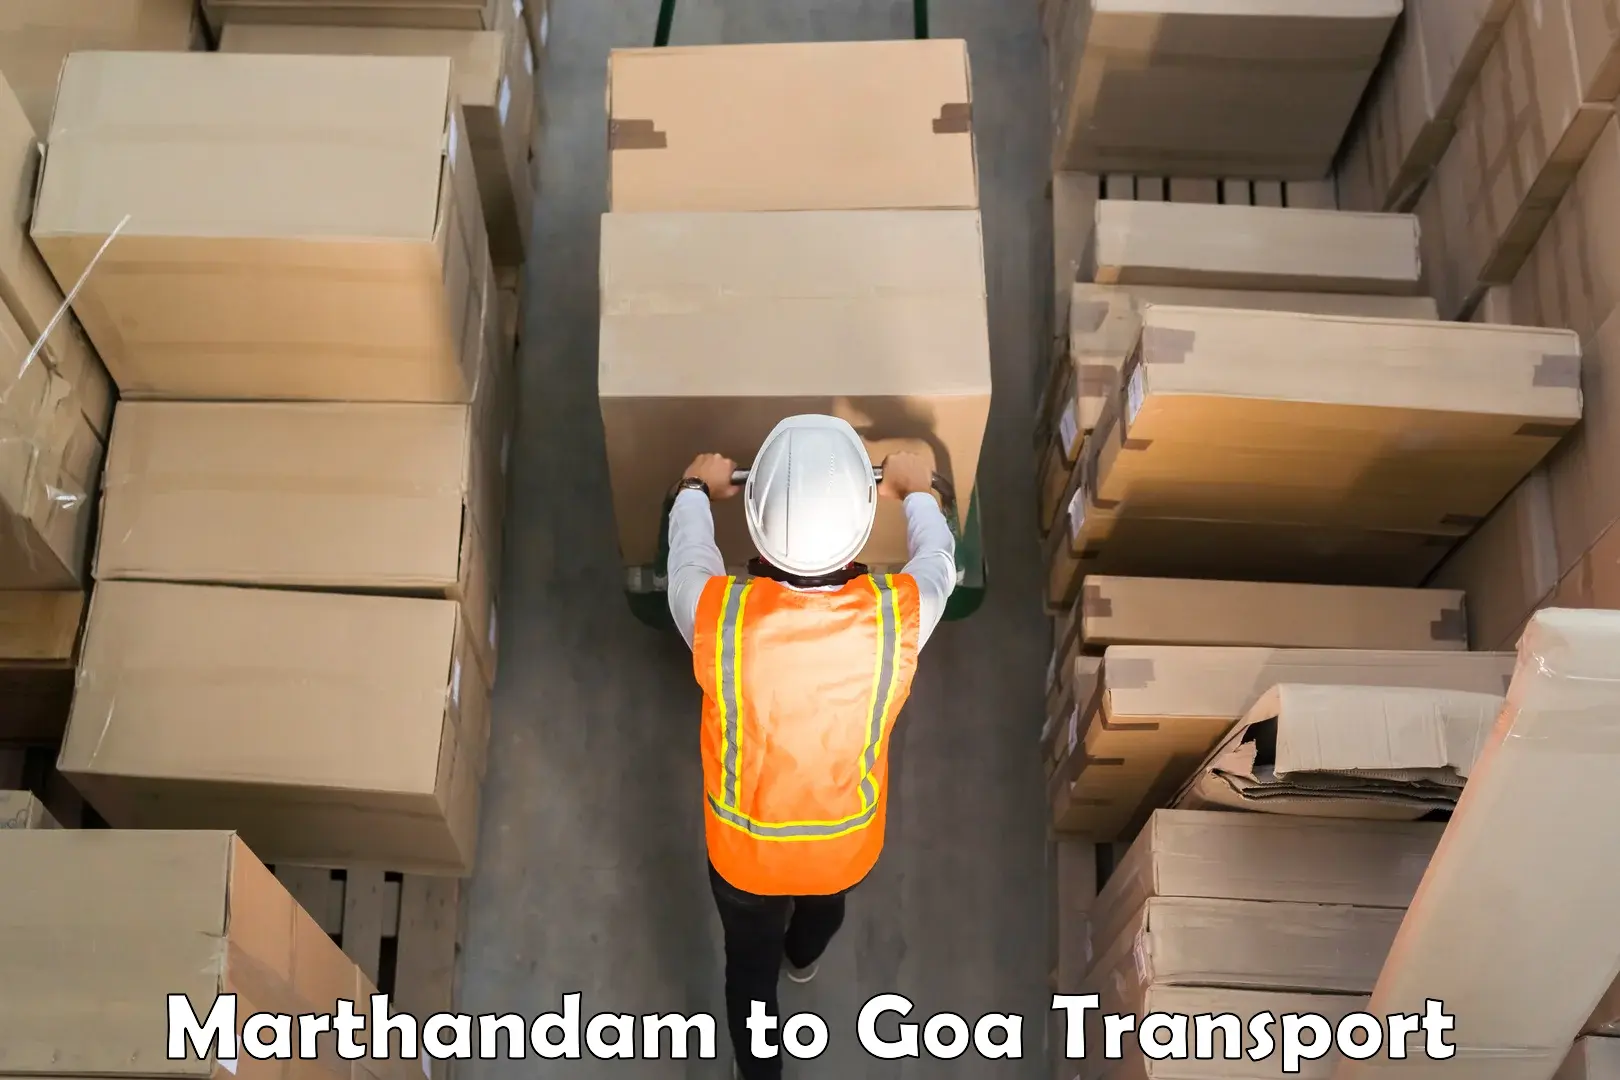 Express transport services in Marthandam to IIT Goa